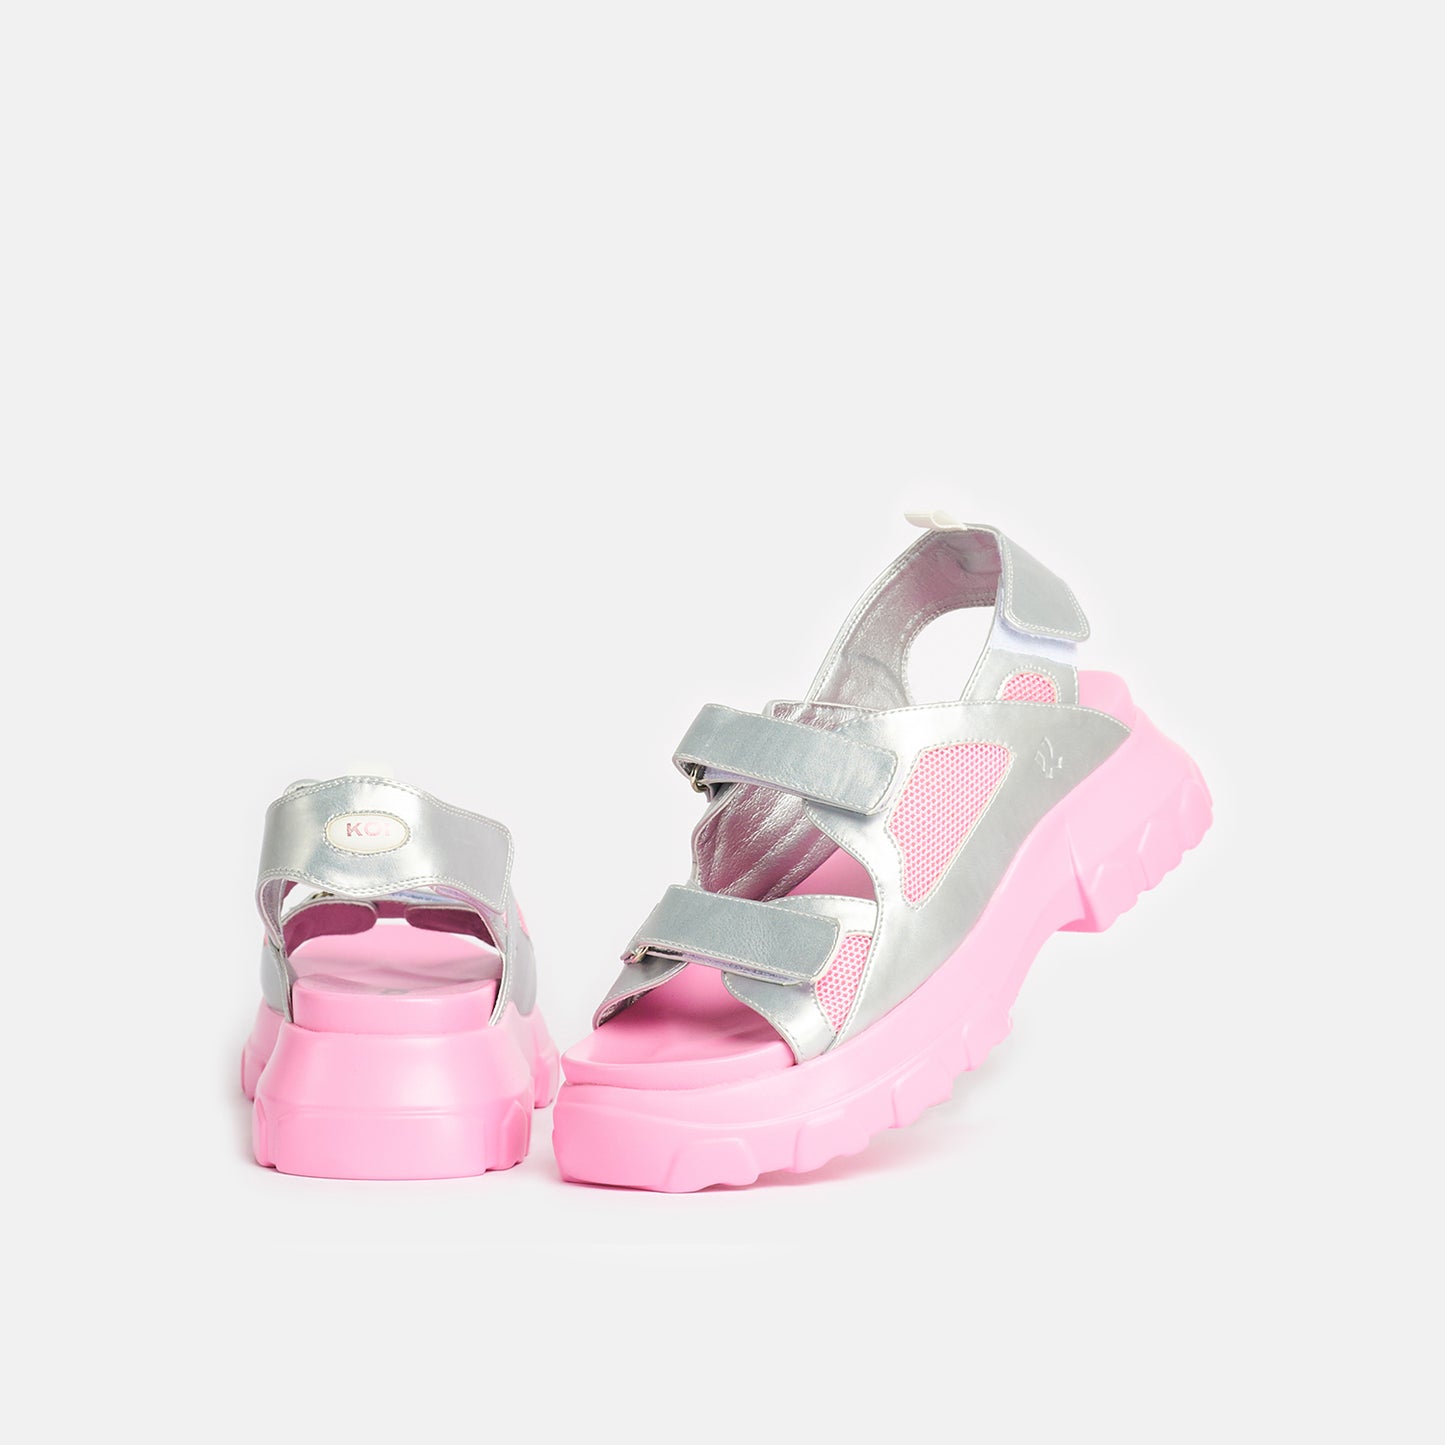 Fated Love Silver Chunky Sandals - Sandals - KOI Footwear - Silver - Front View